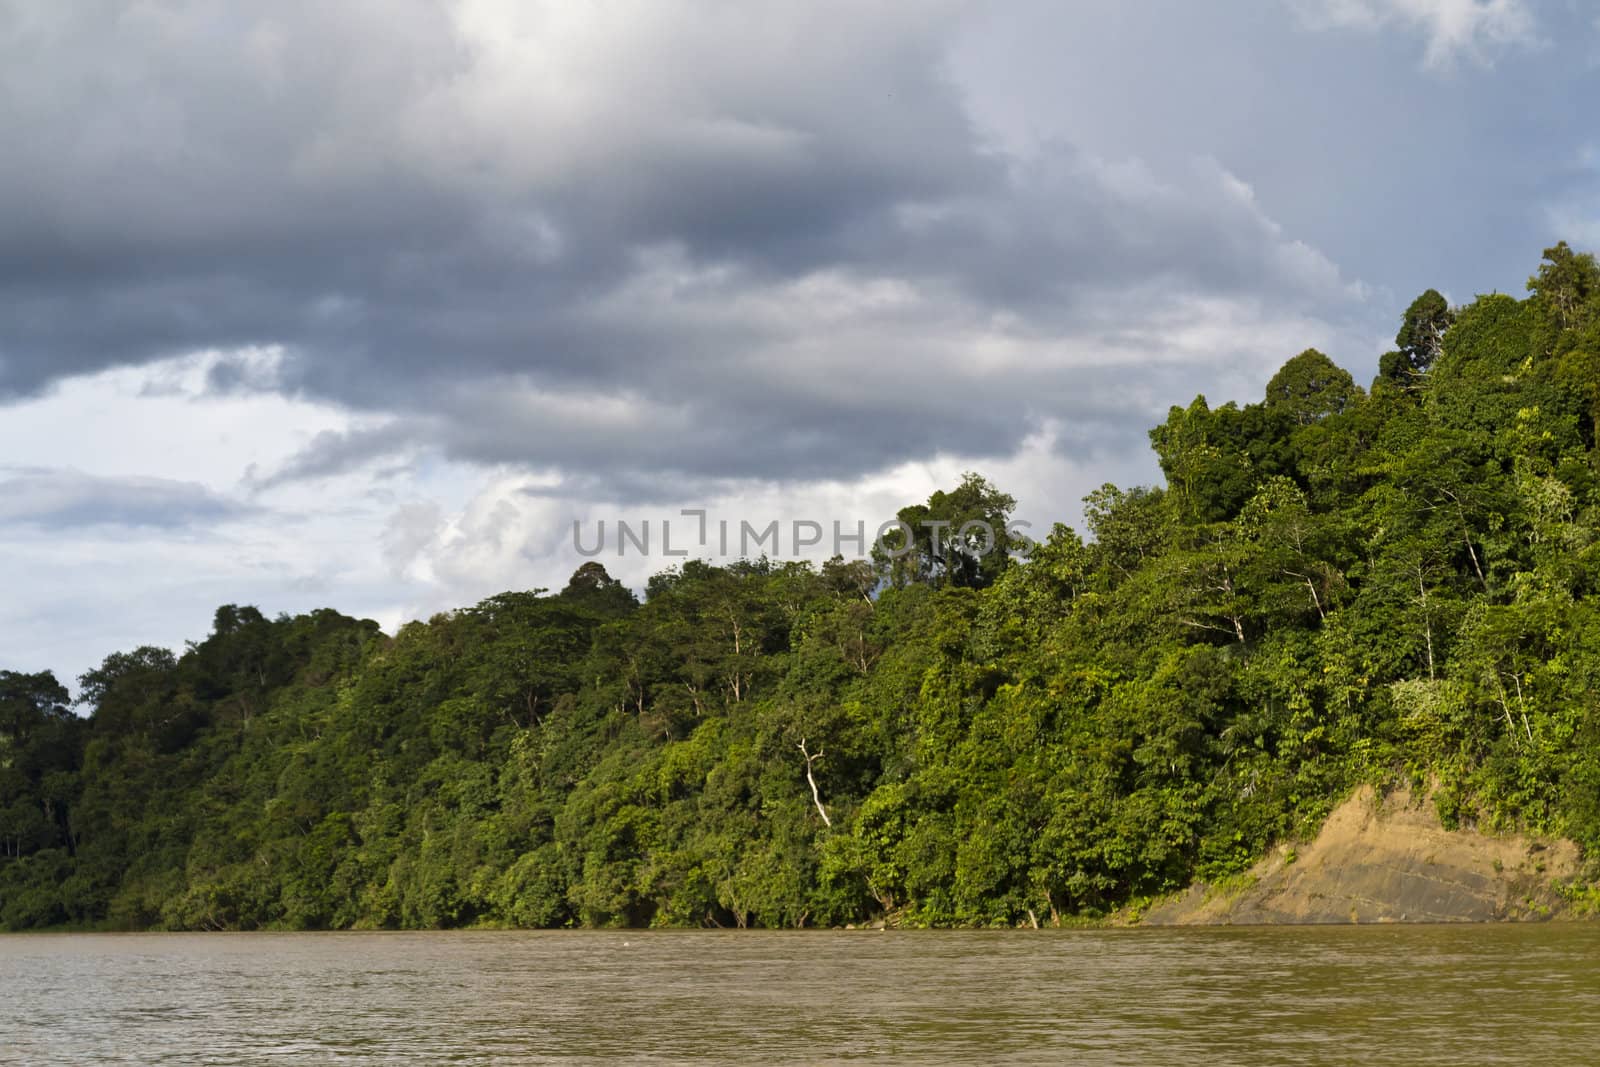 view of rainforest by the edge of Rajang River in Sarawak, Malaysia with dark clouds forming in the background